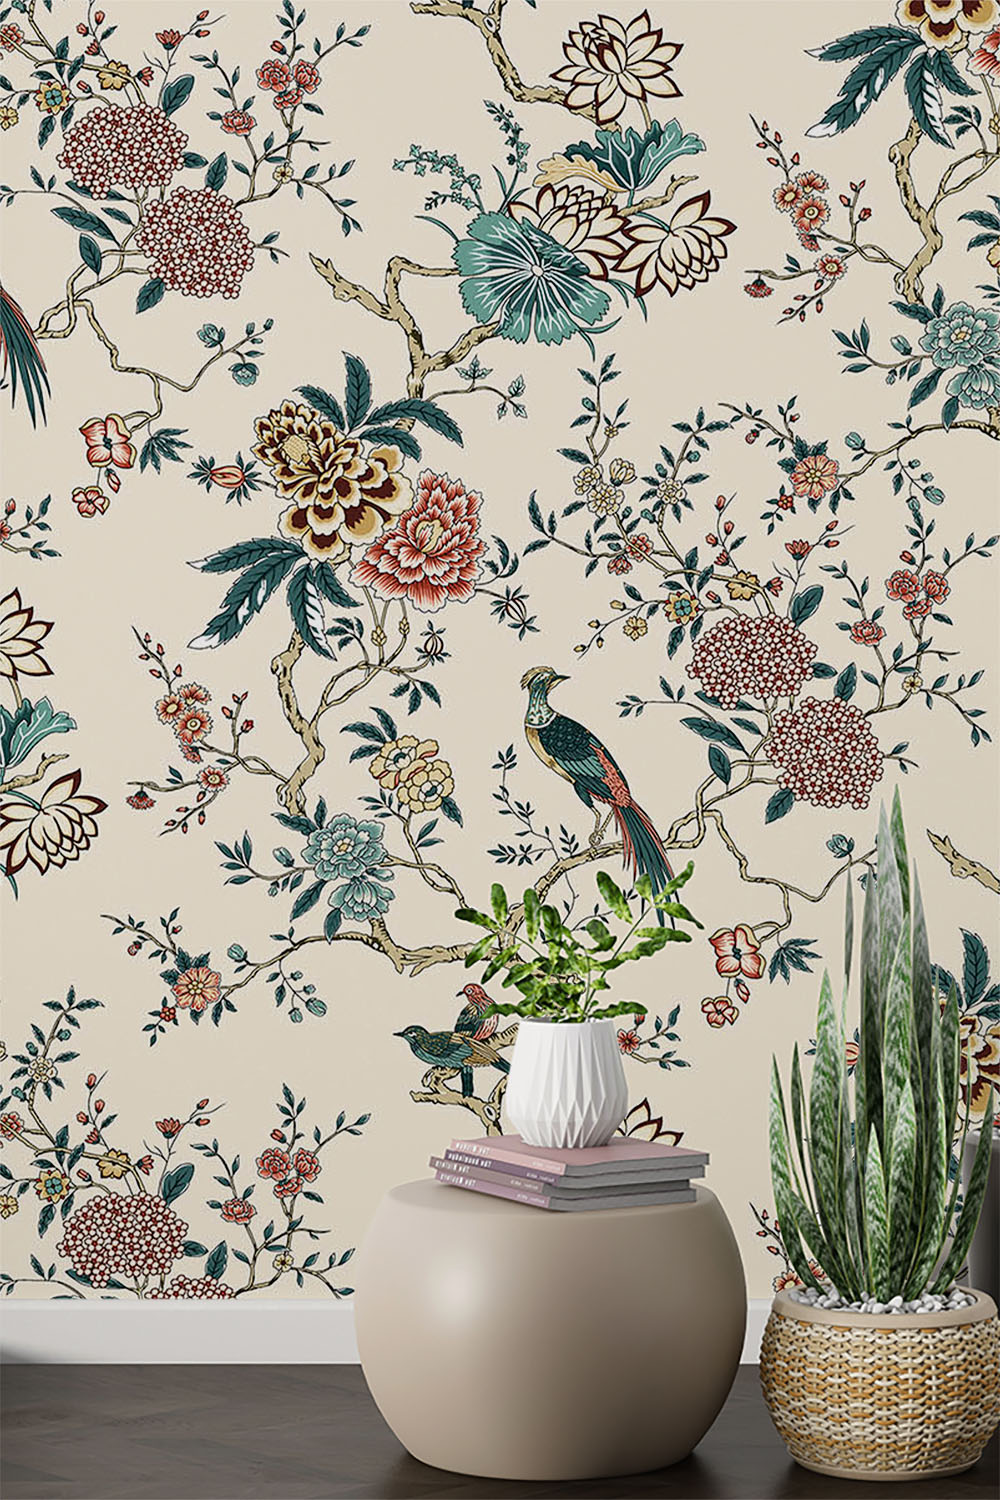 chinoiserie-pattern-with-birds-and-flowers-wallpaper-sample